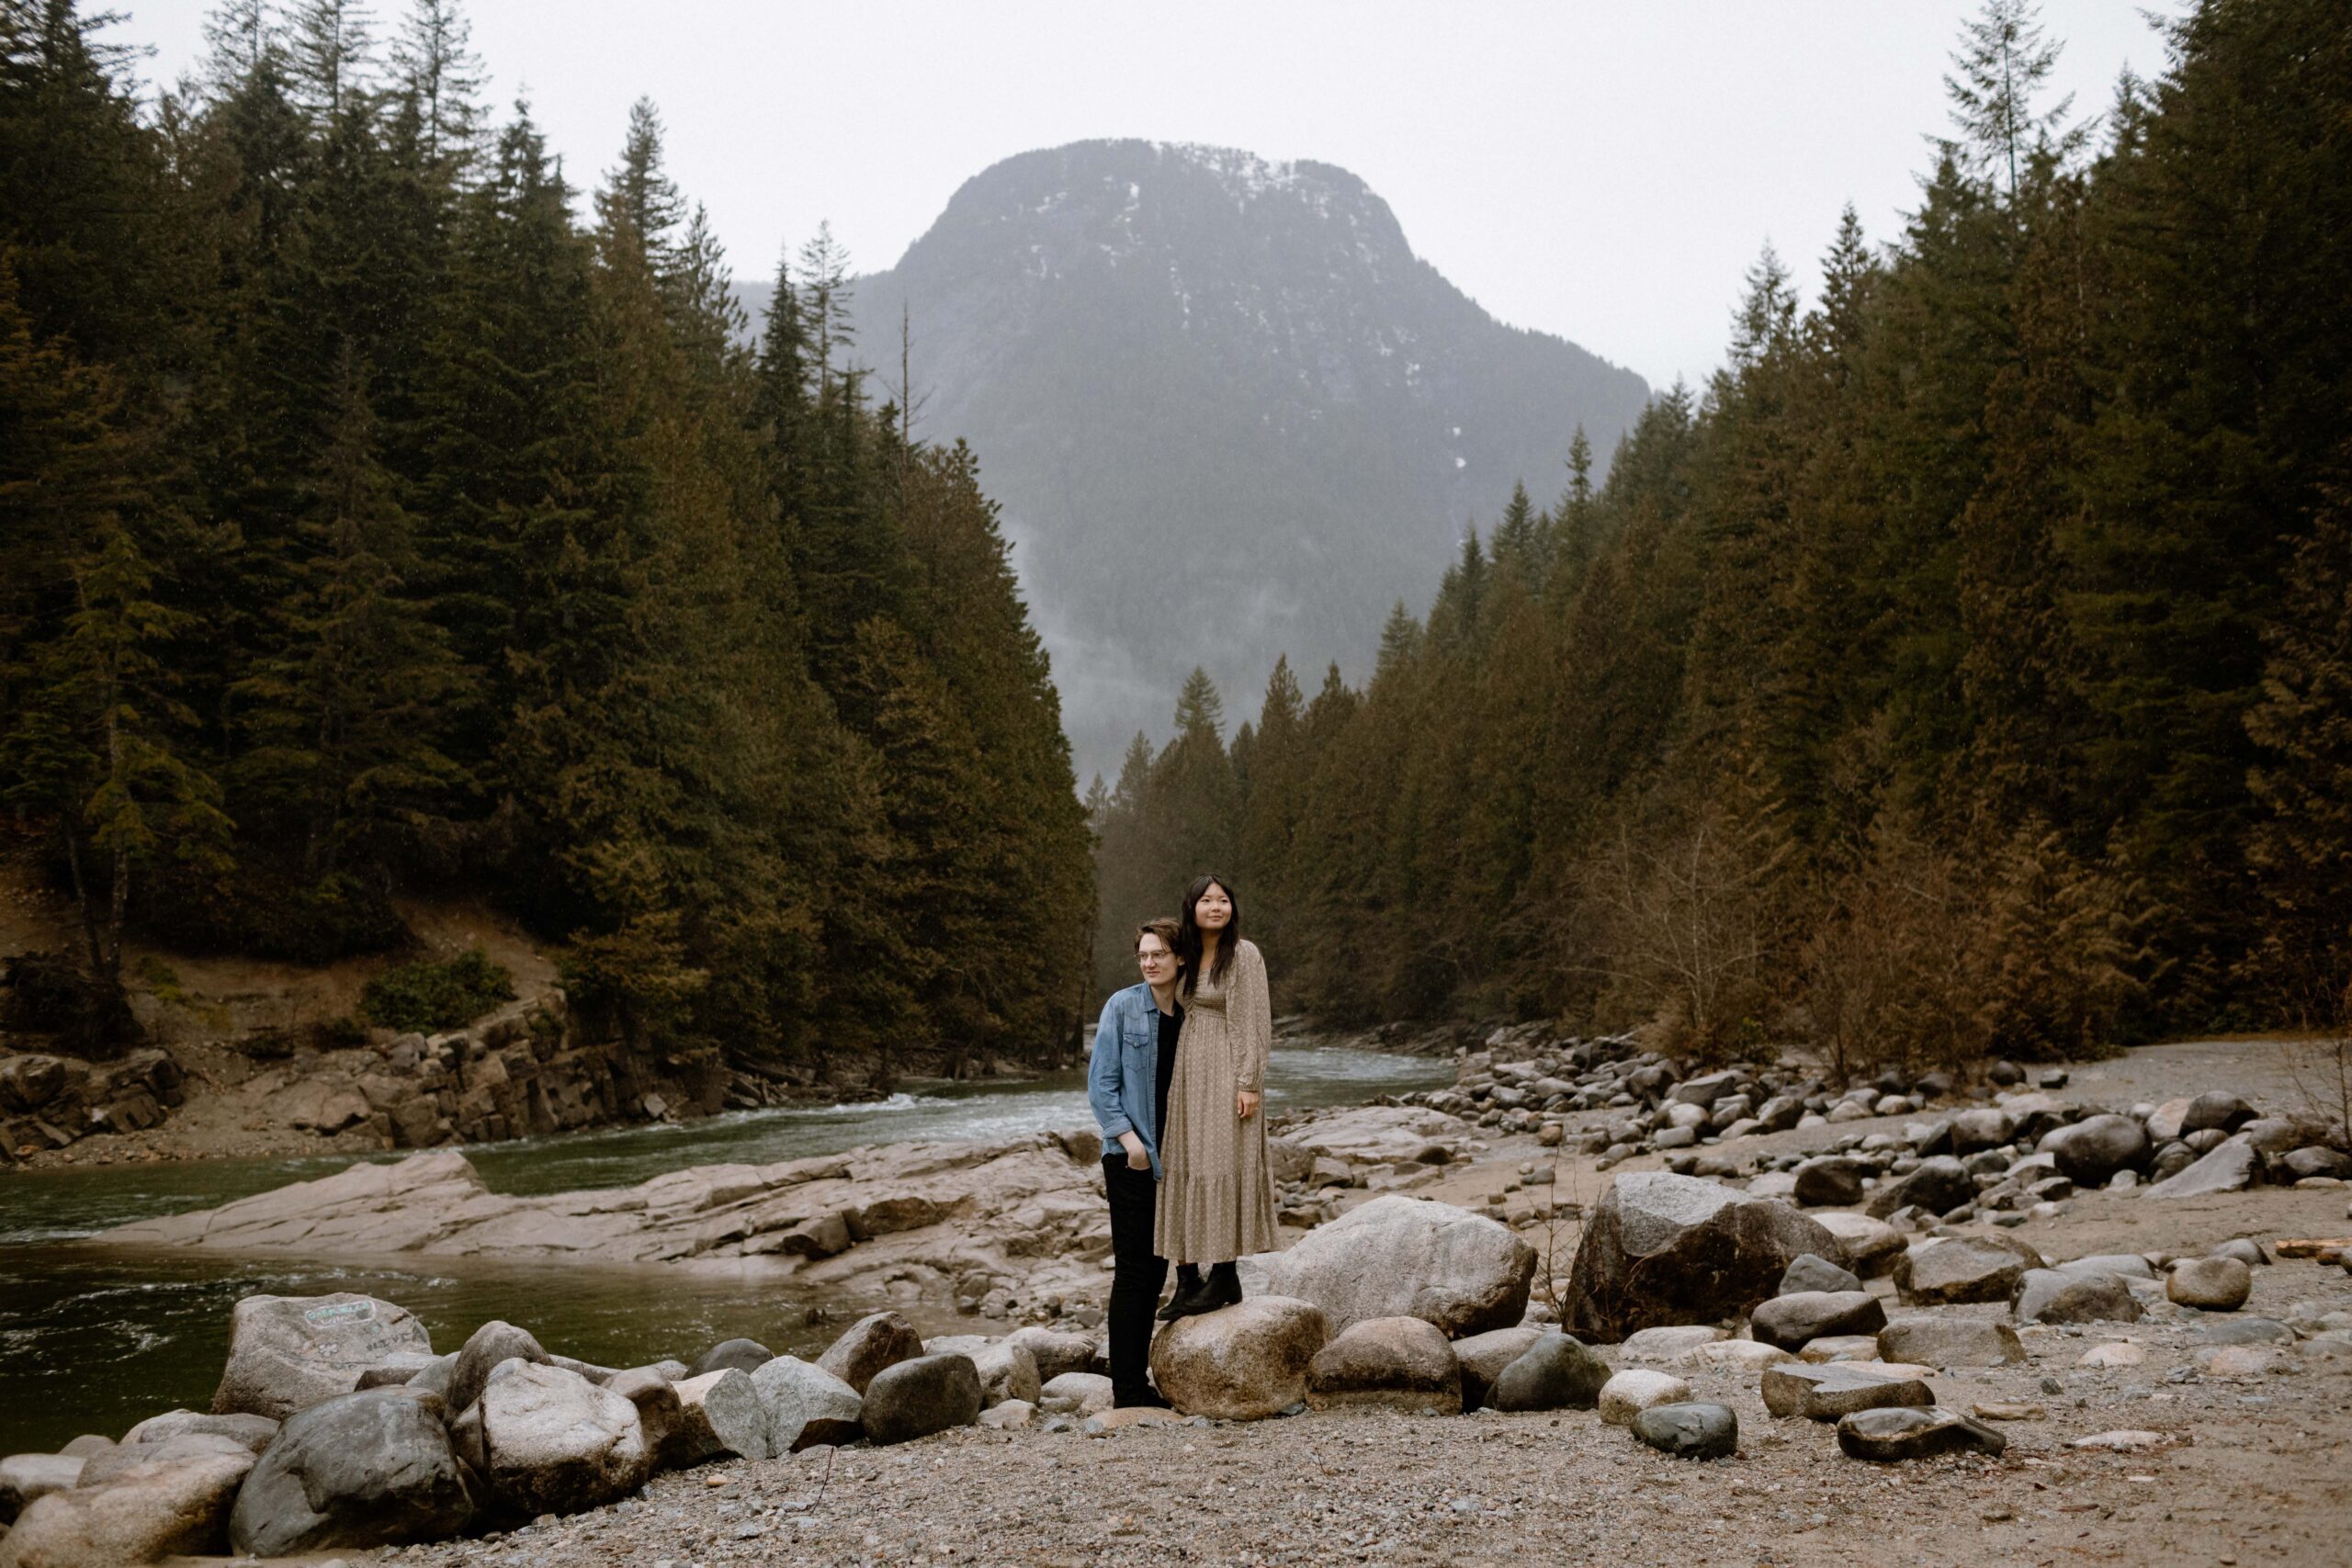 Engagement photo locations in vancouver